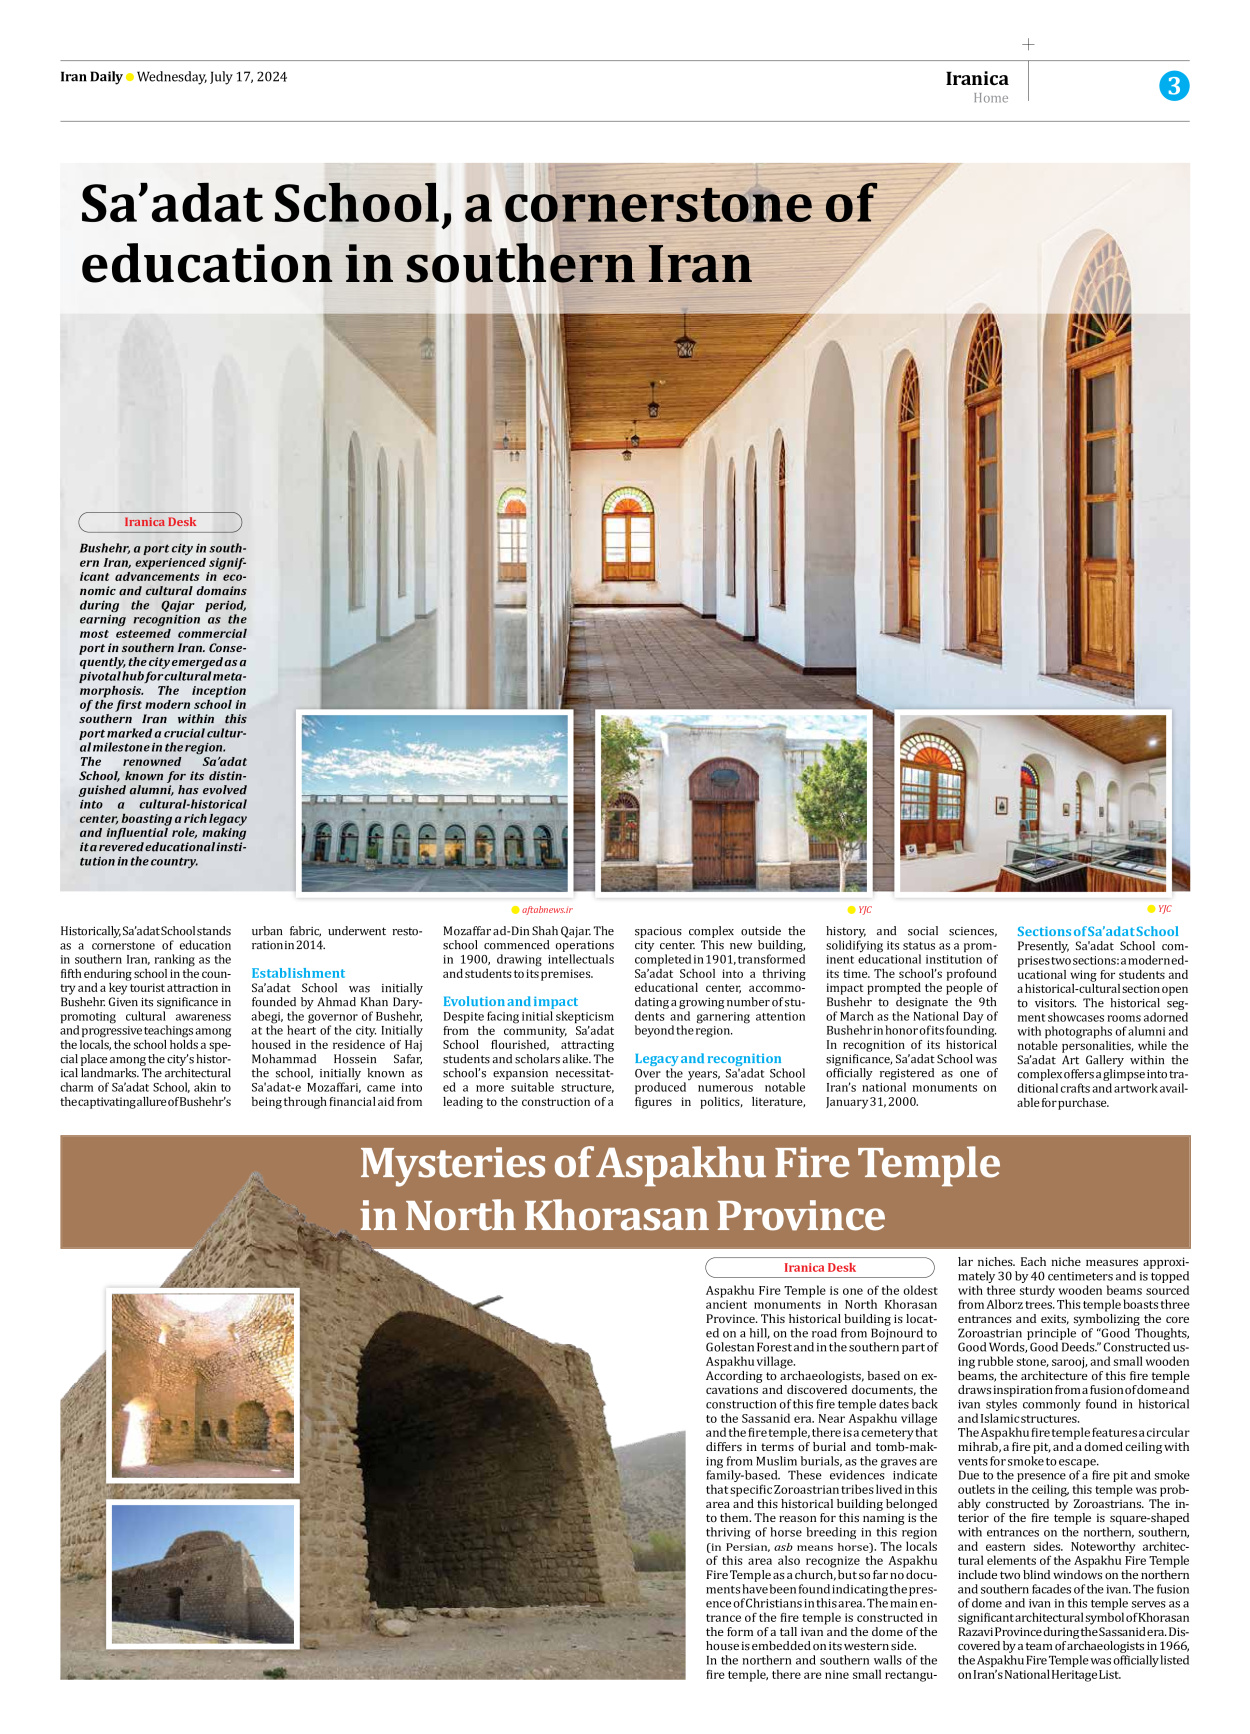 Iran Daily - Number Seven Thousand Six Hundred and Five - 17 July 2024 - Page 3